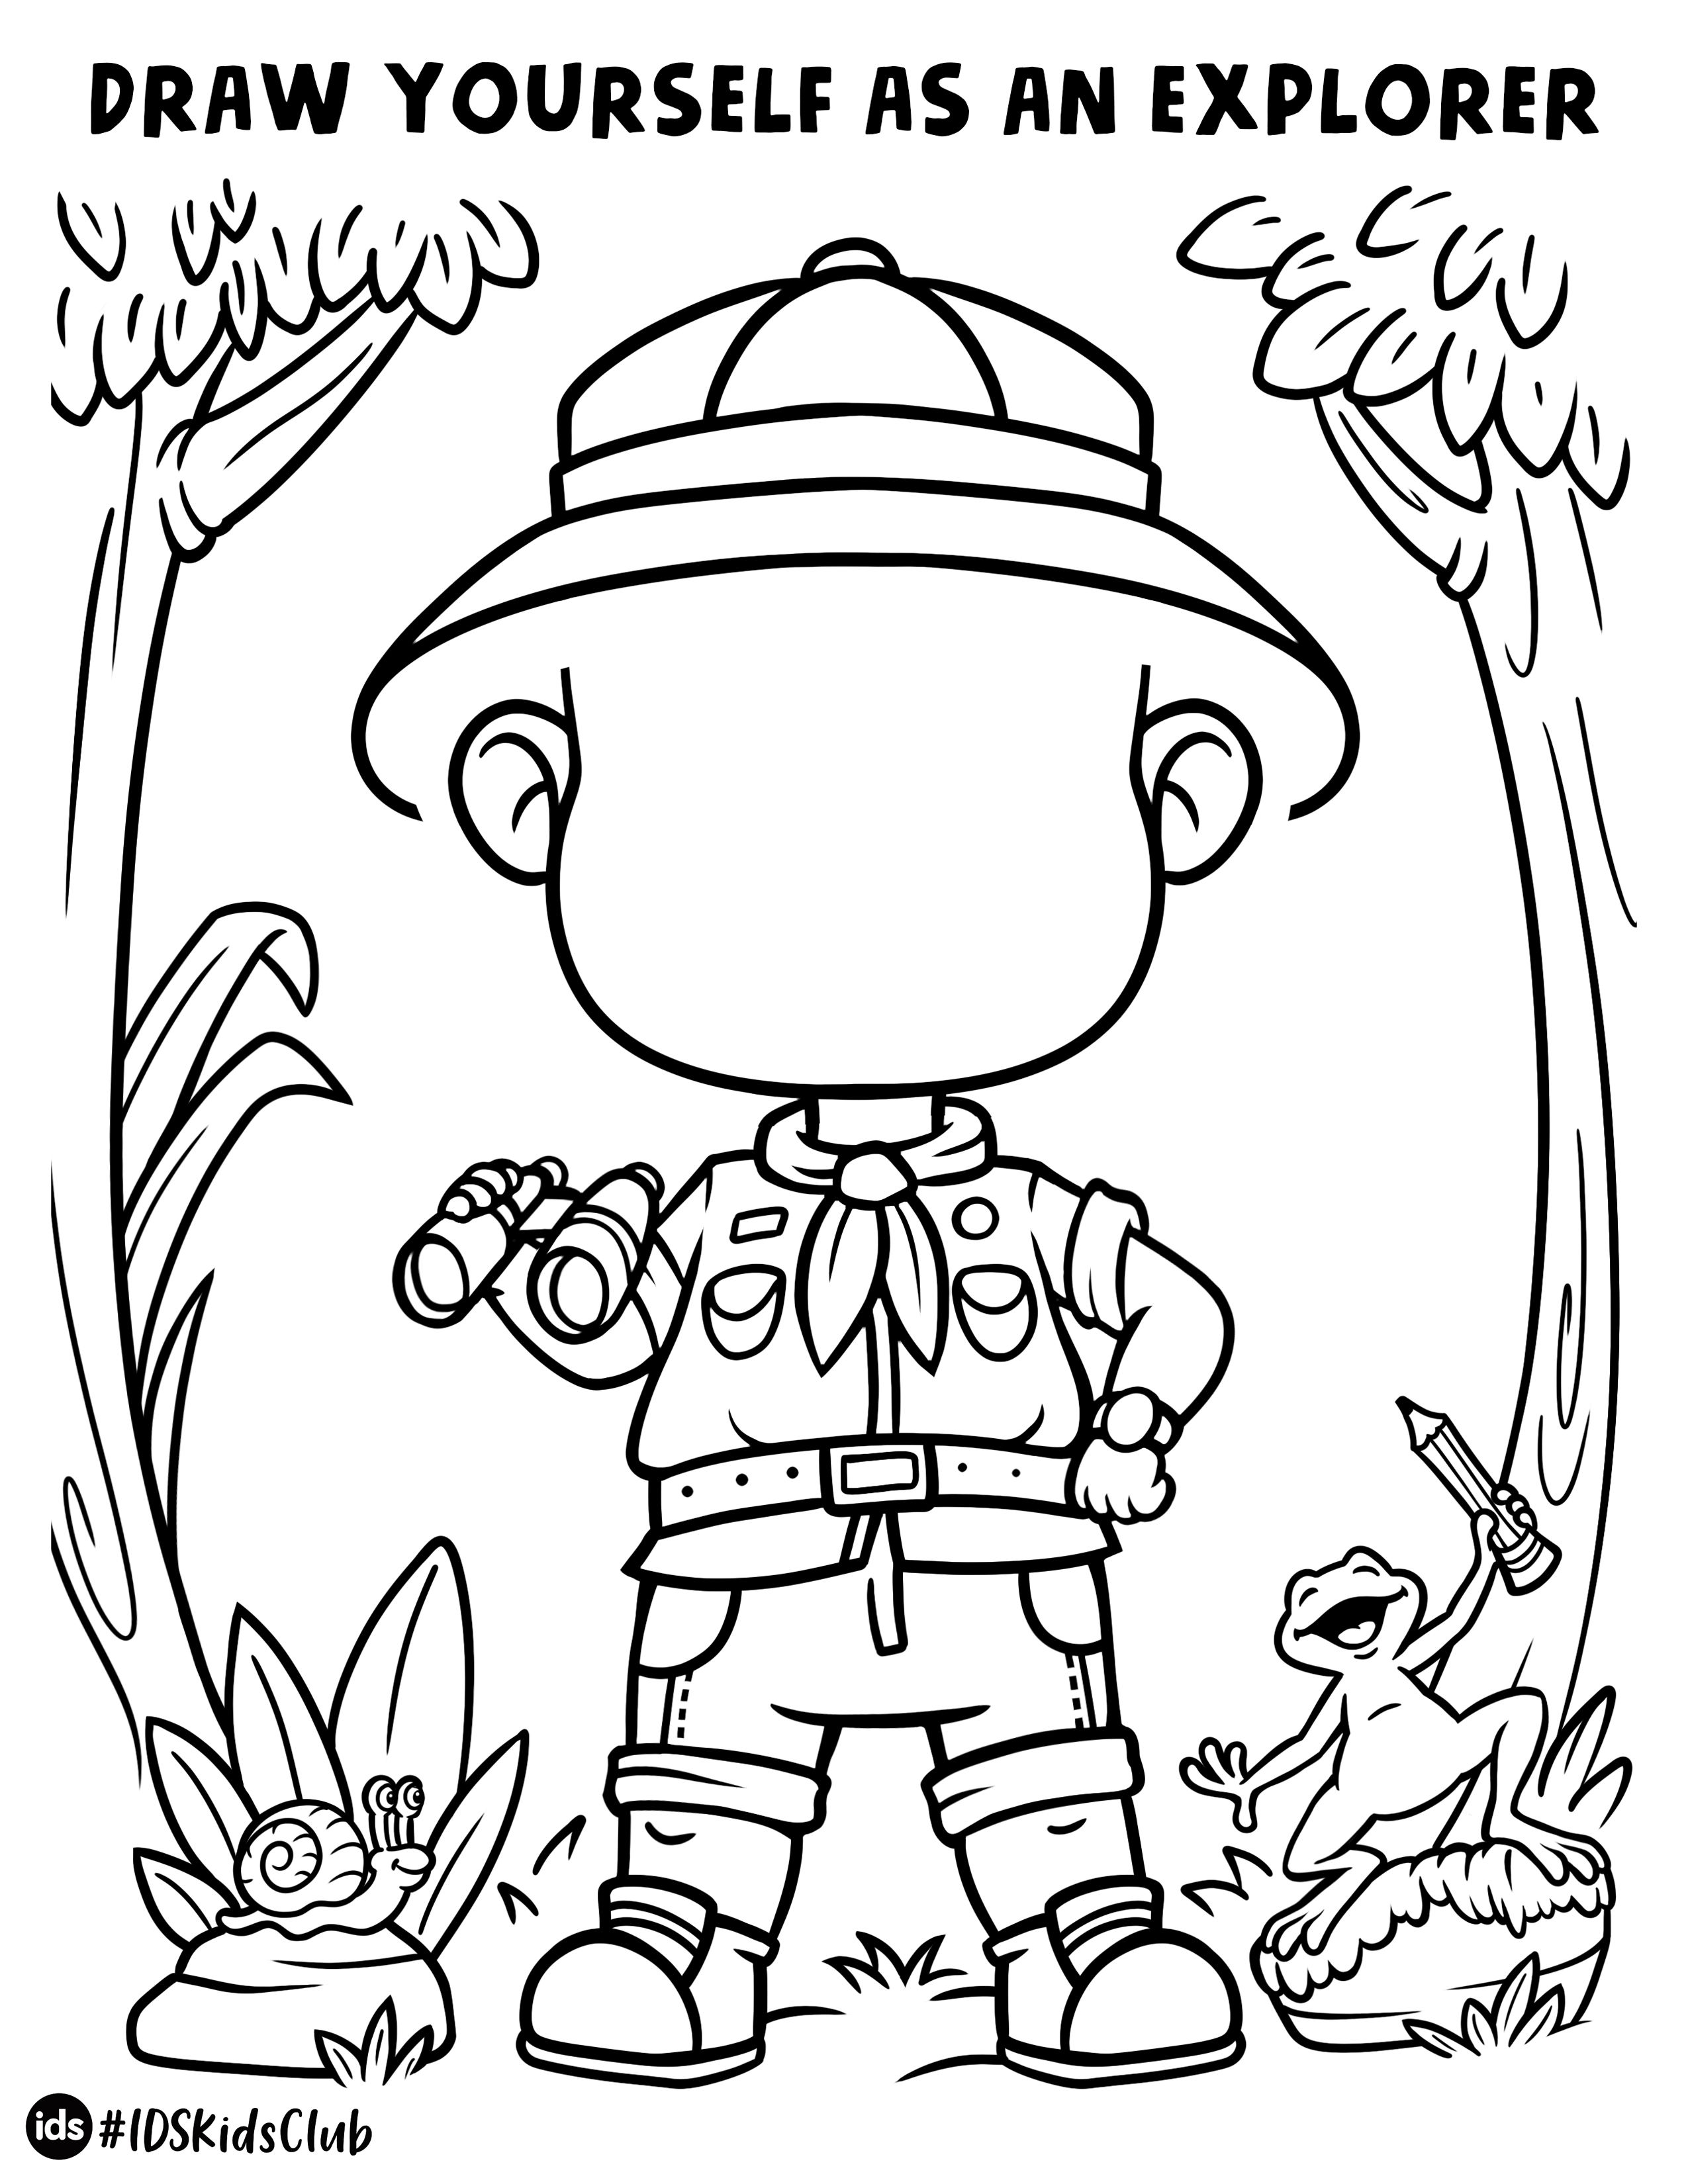 Pin on IDS Kids Club: Coloring Pages and Activity Sheets